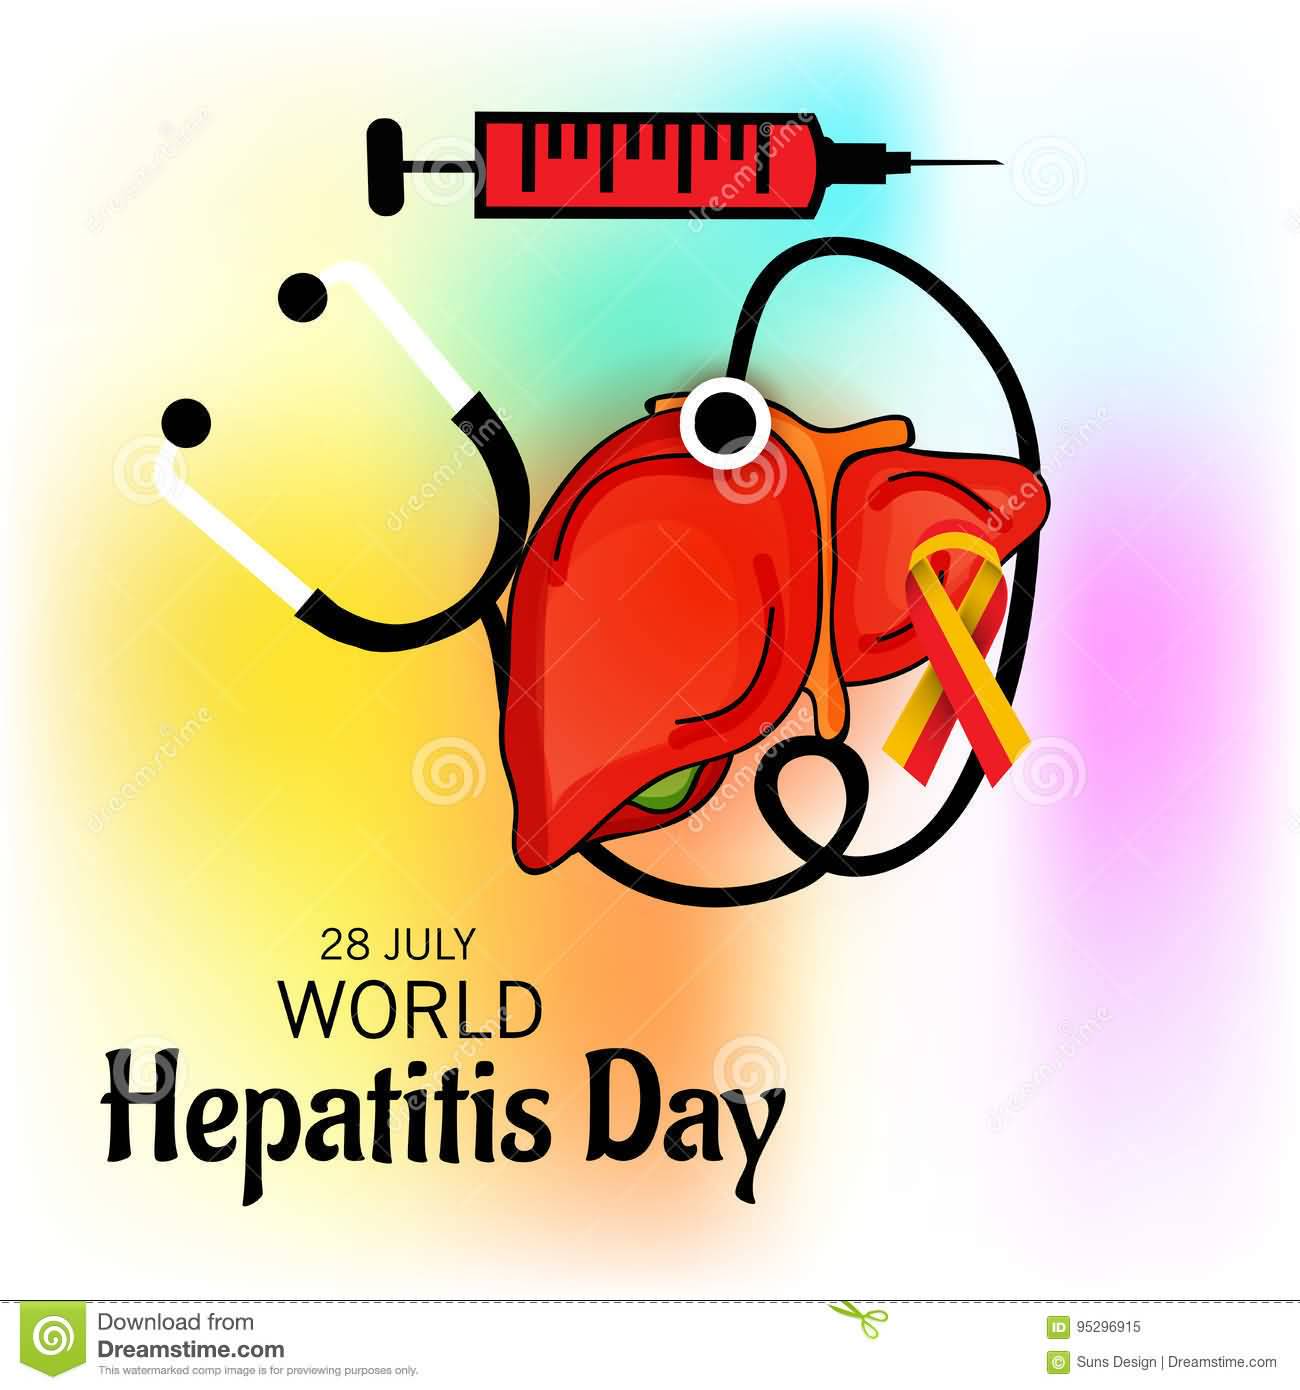 28 July World Hepatitis Day Liver With Injection And Stethoscope Illustration